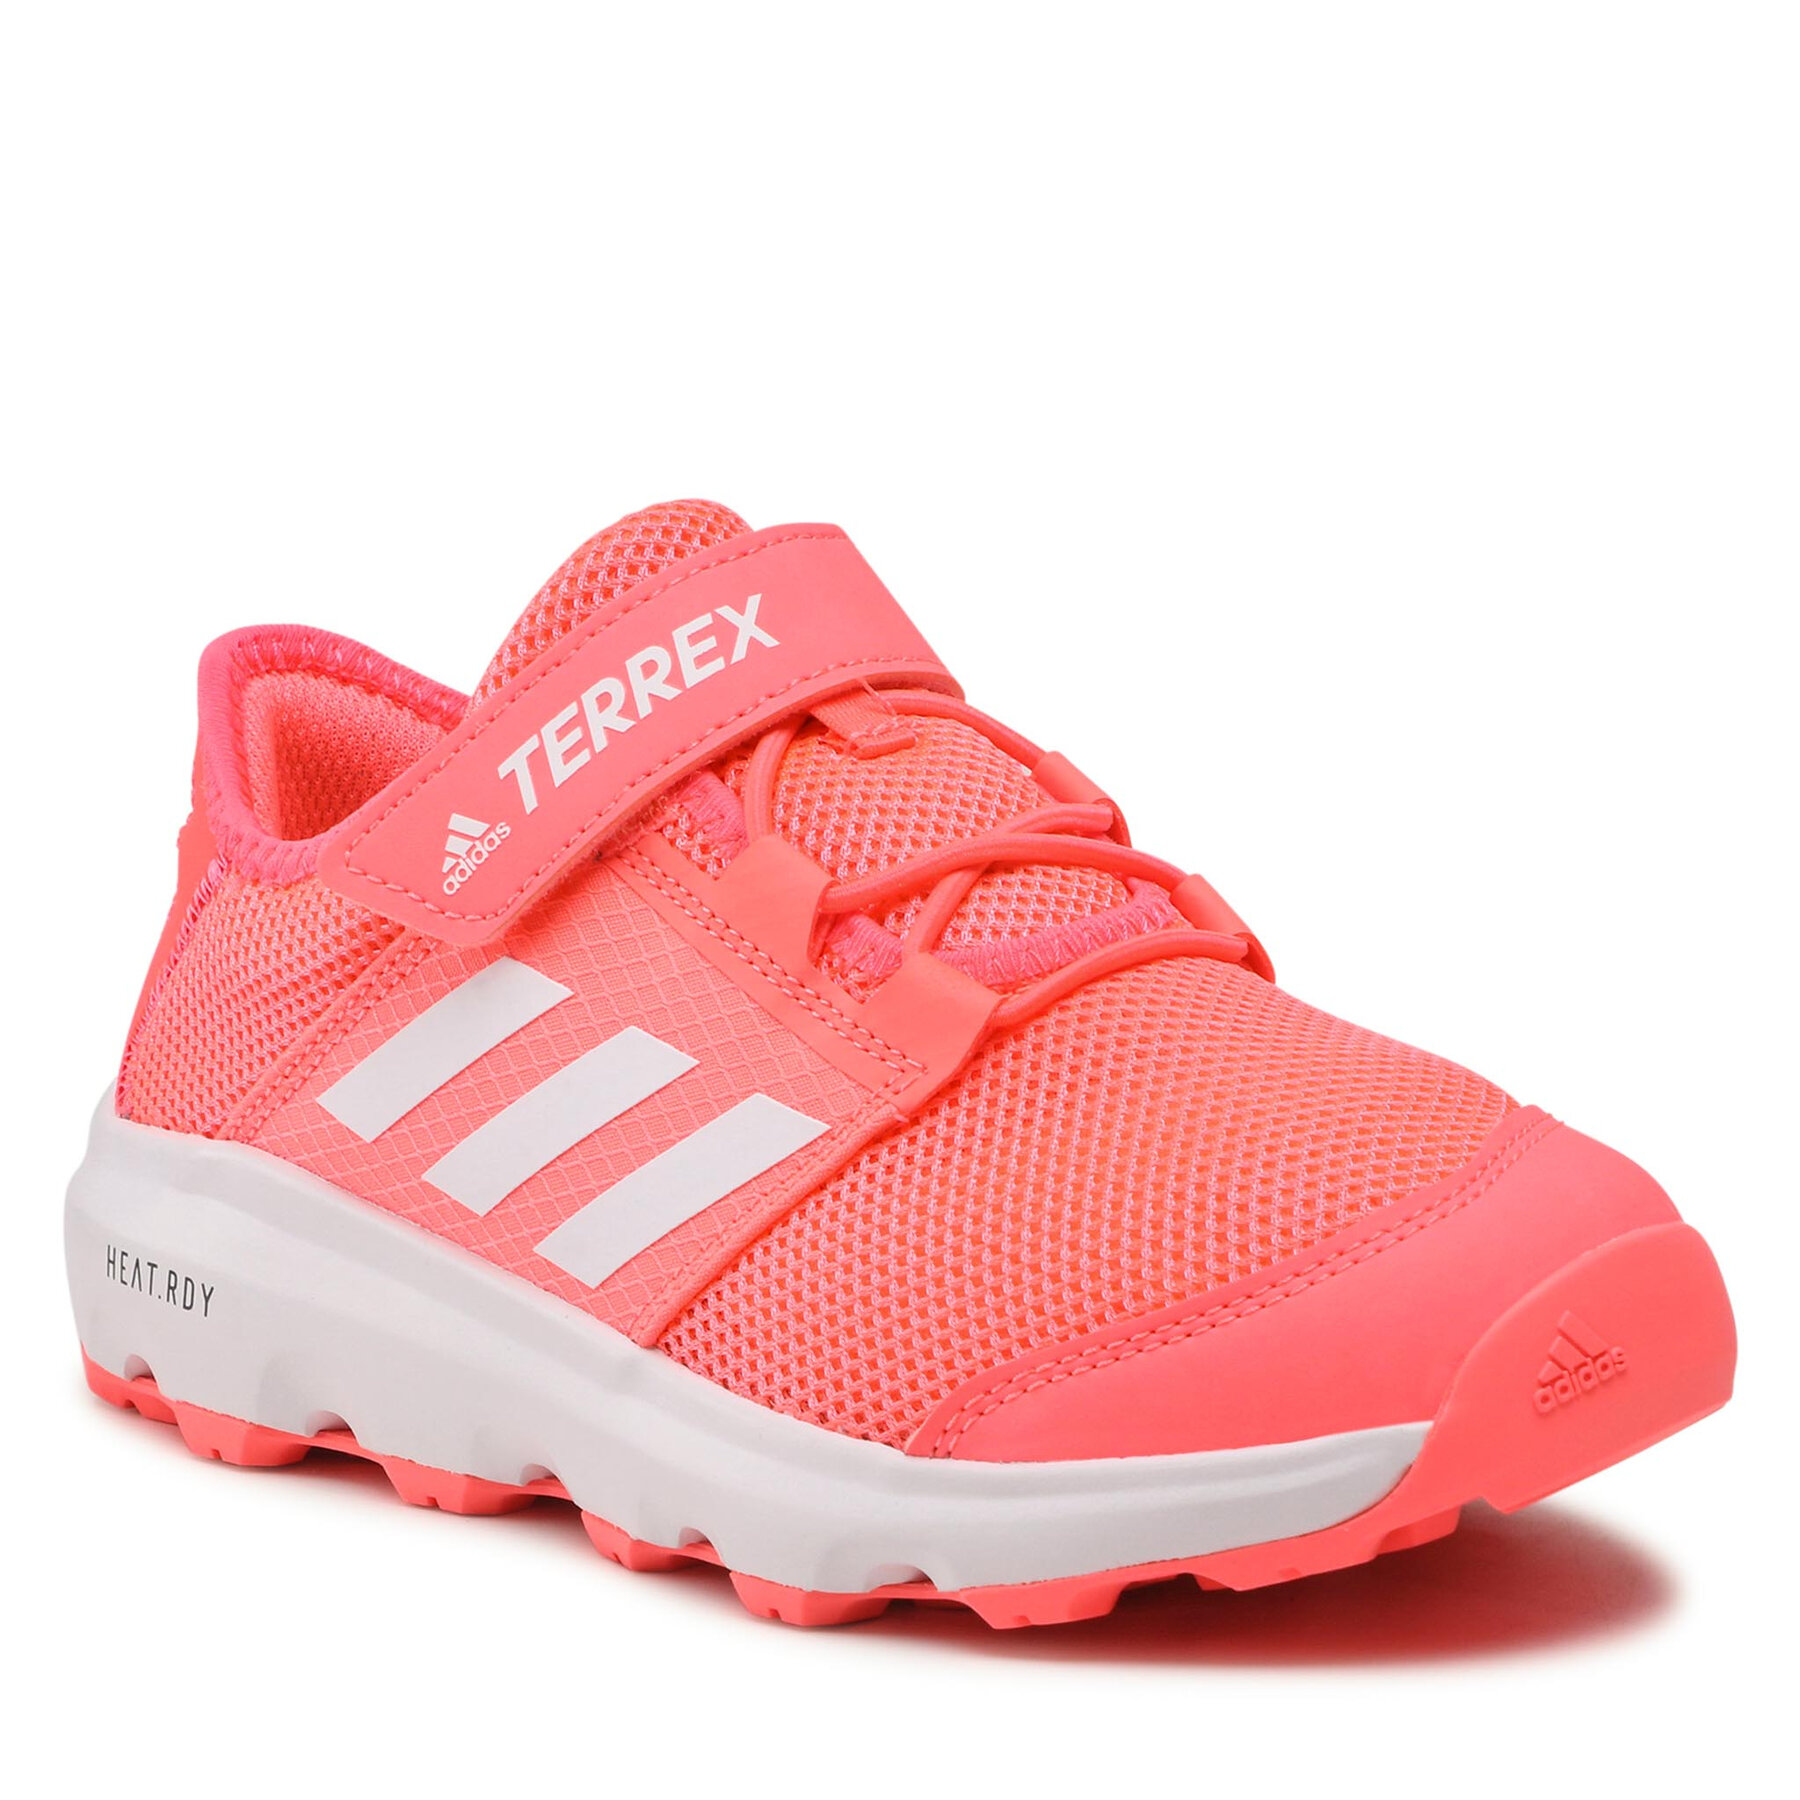 Chaussures adidas Terrex Voyager Cf H.Rdy K GX6283 Acired/Ftwwht/Turbo